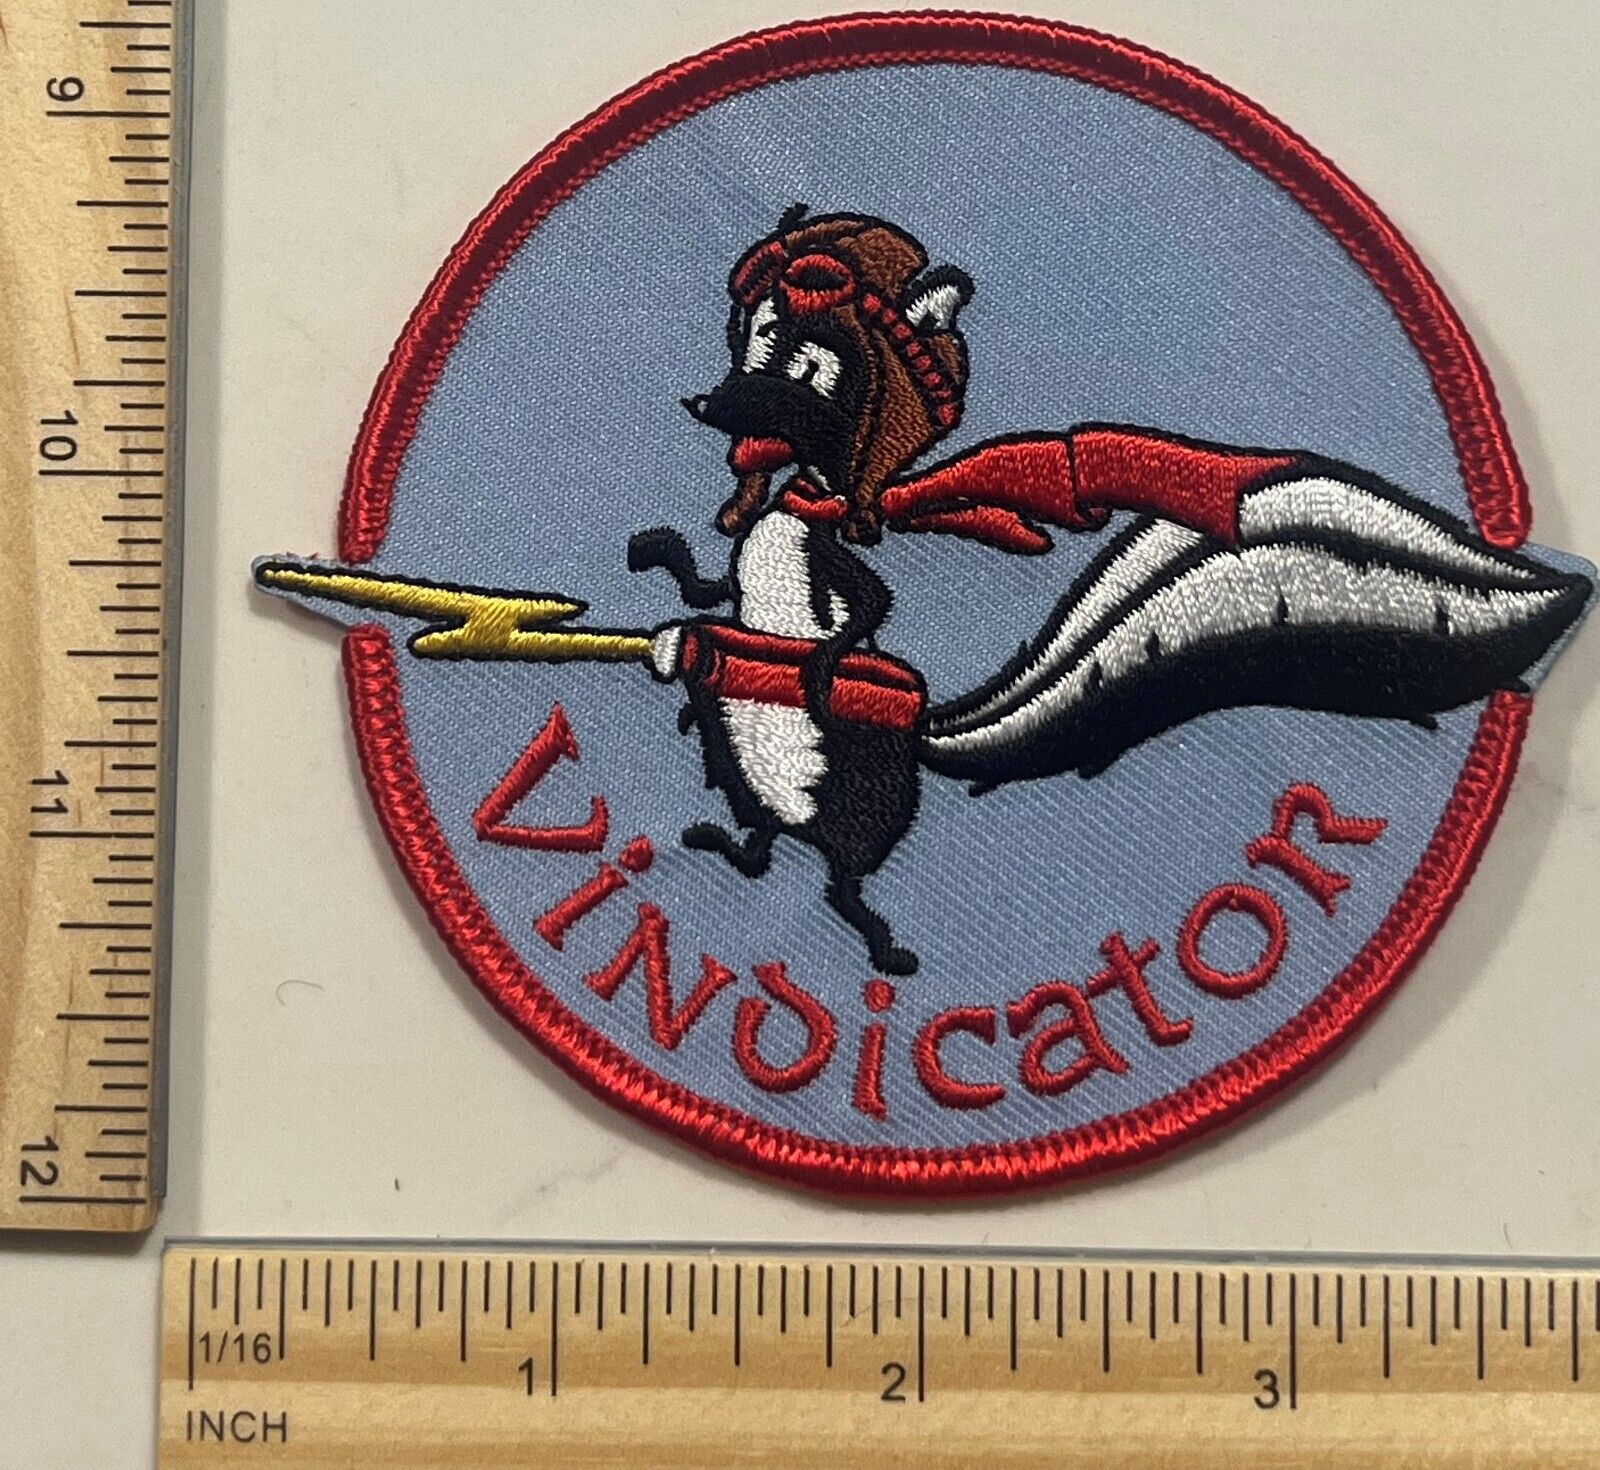 RARE - MILITARY BLACK OPS PATCH - VINDICATOR SYSTEM LOCKHEED SKUNK WORKS F-117A